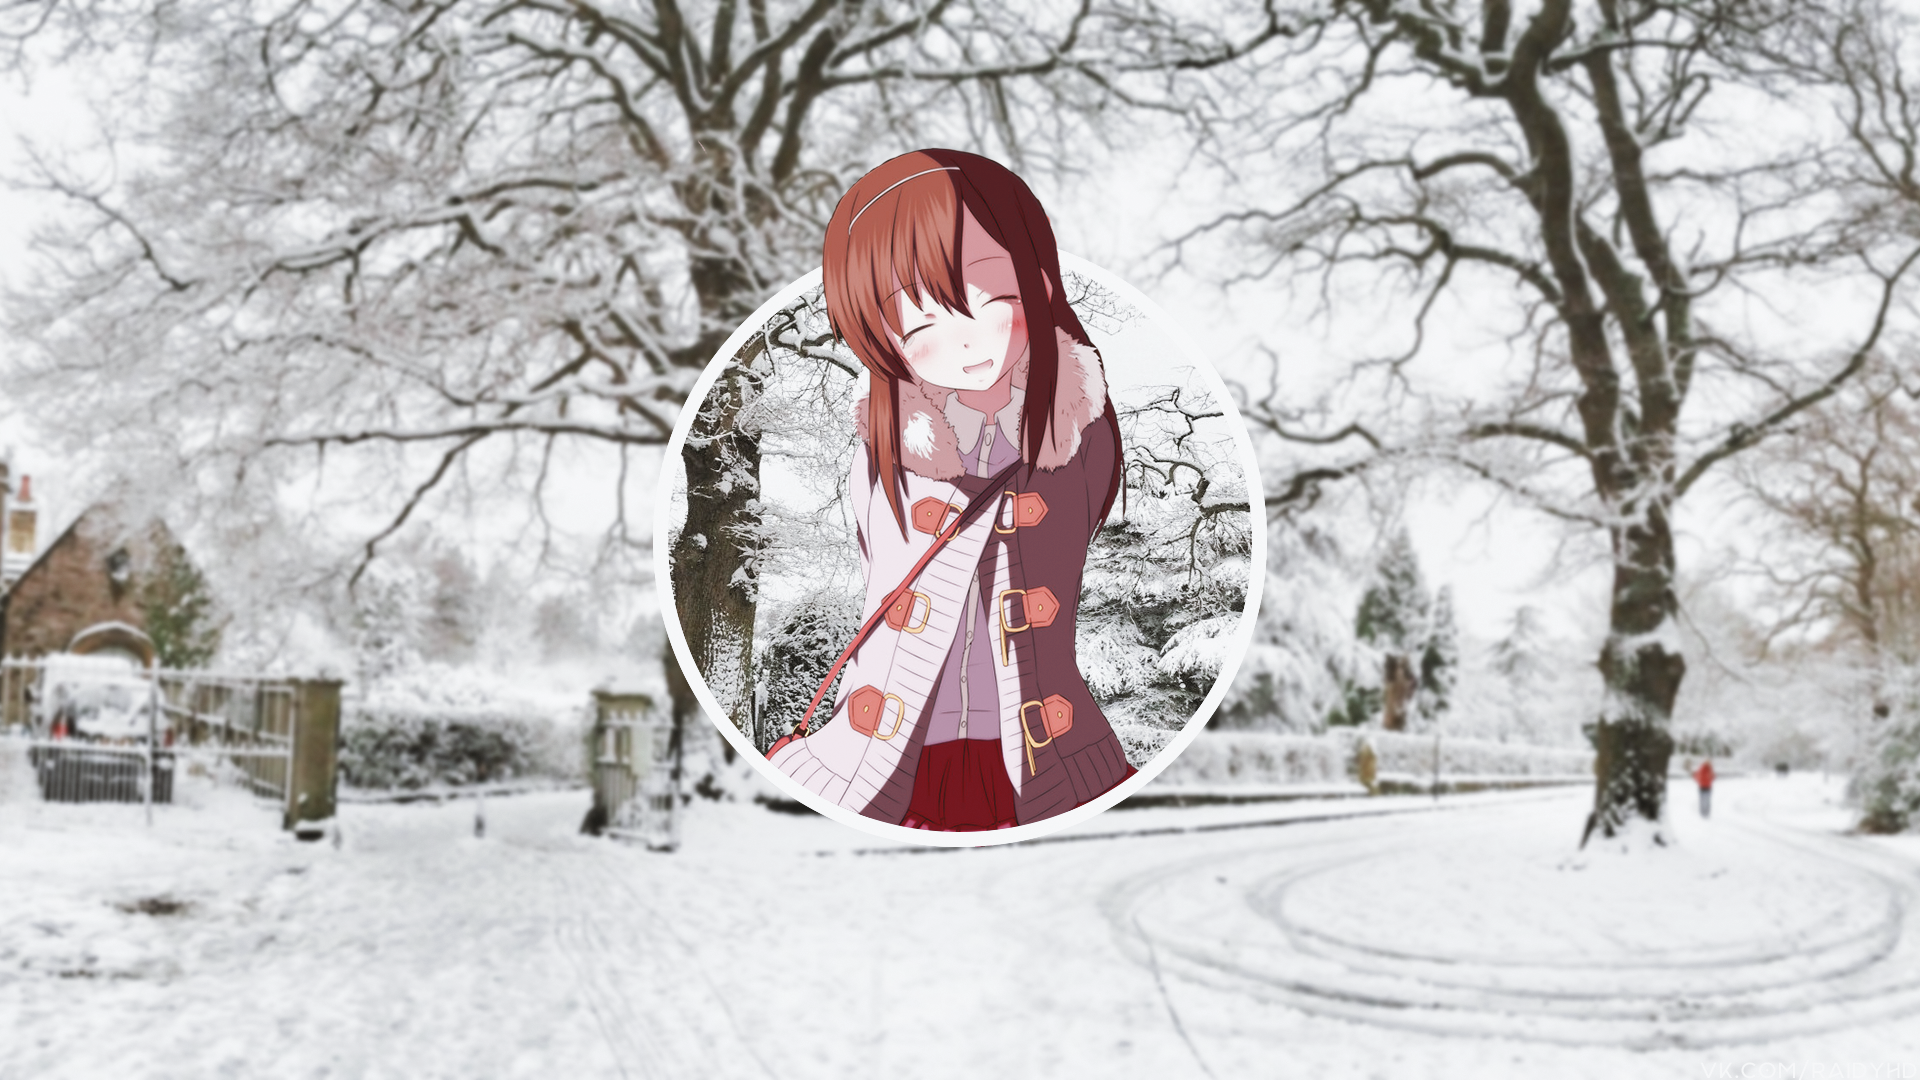 Anime 1920x1080 anime anime girls picture-in-picture snow